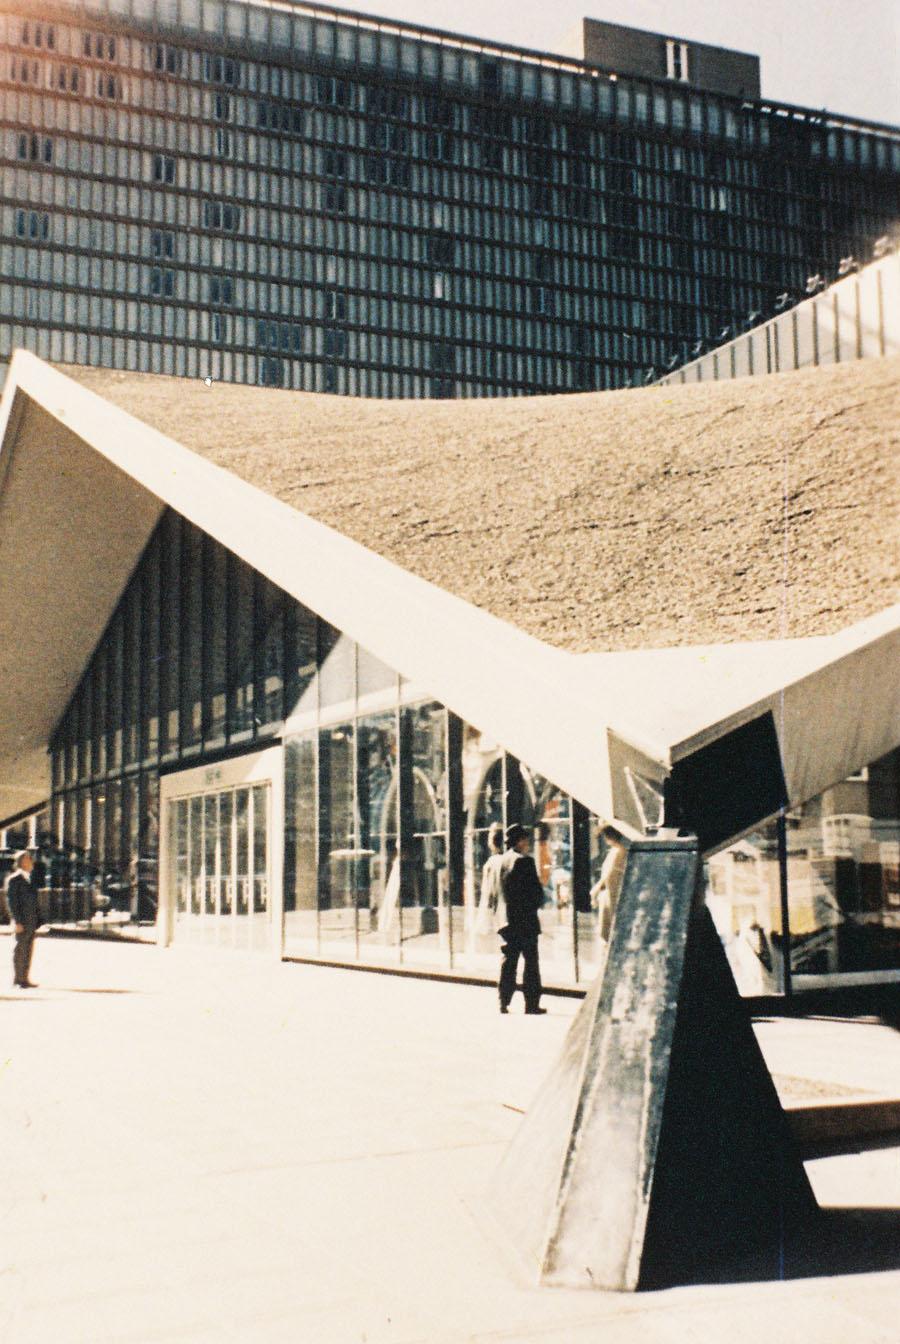 US National Bank Of Denver, Mile High Center, Denver, Colorado By Ieoh Ming Pei 1956 - 1965. Entrance Canopy